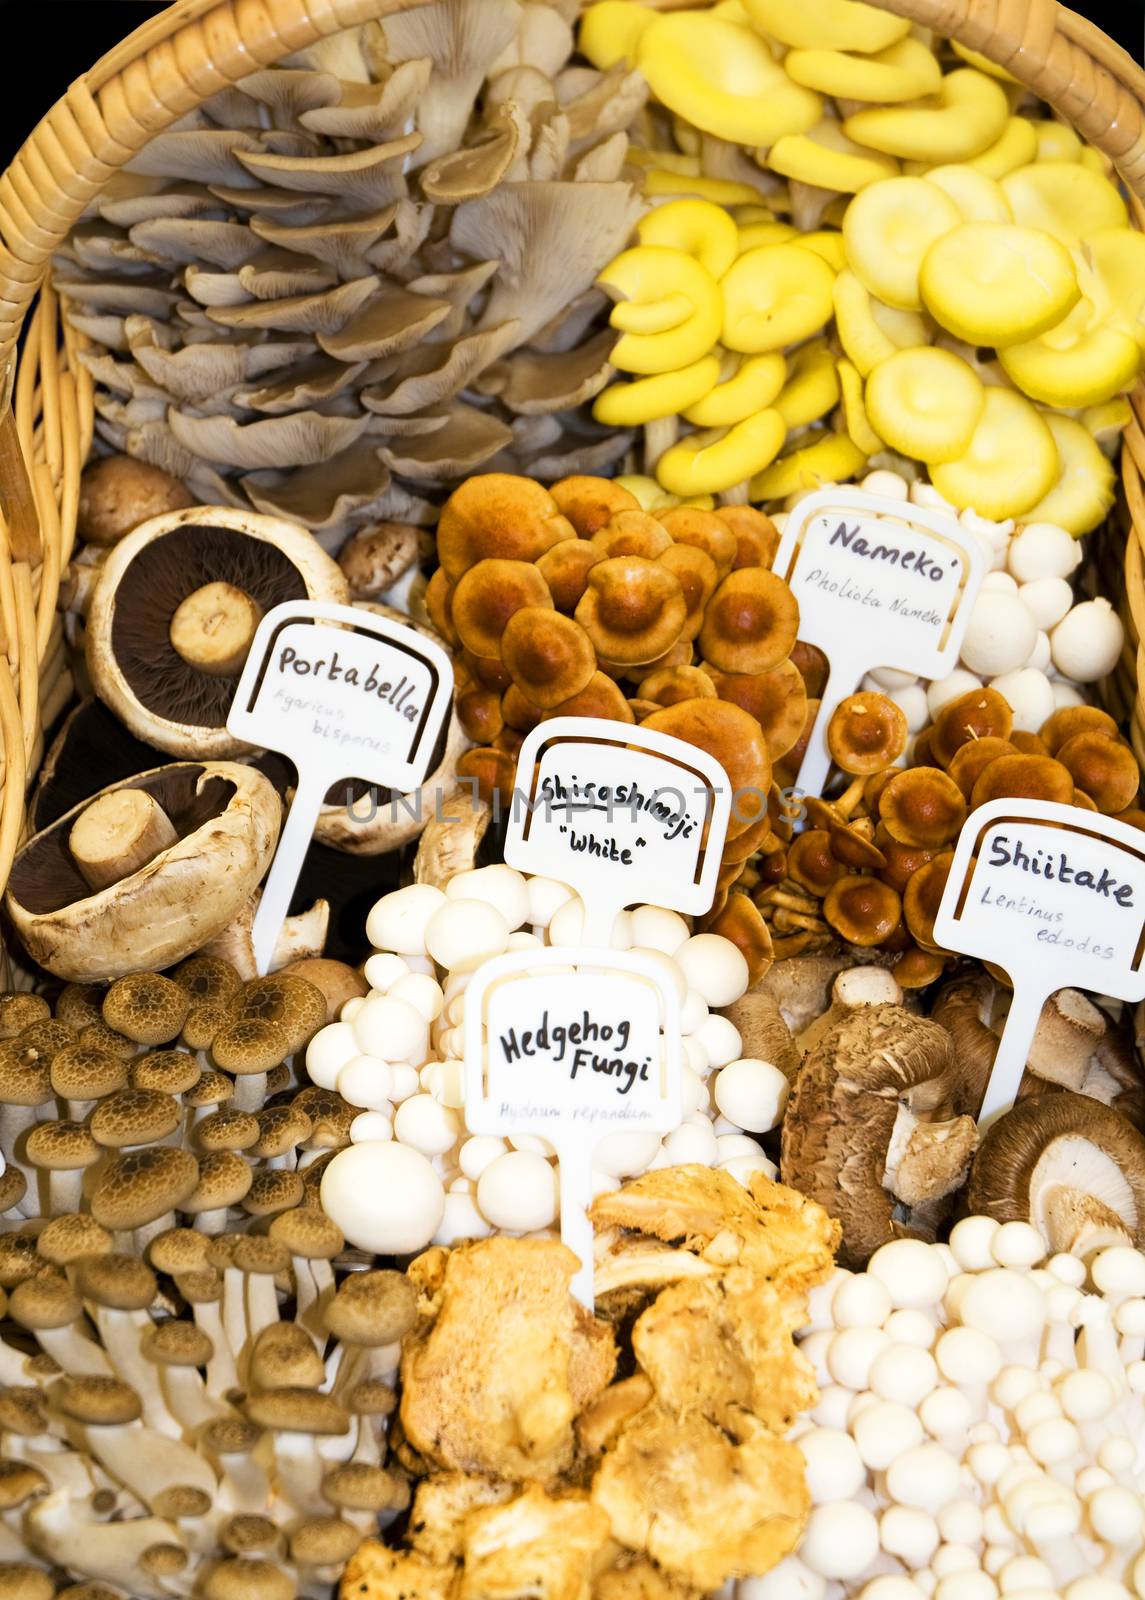 A variety of mushrooms and other fungi in a basket